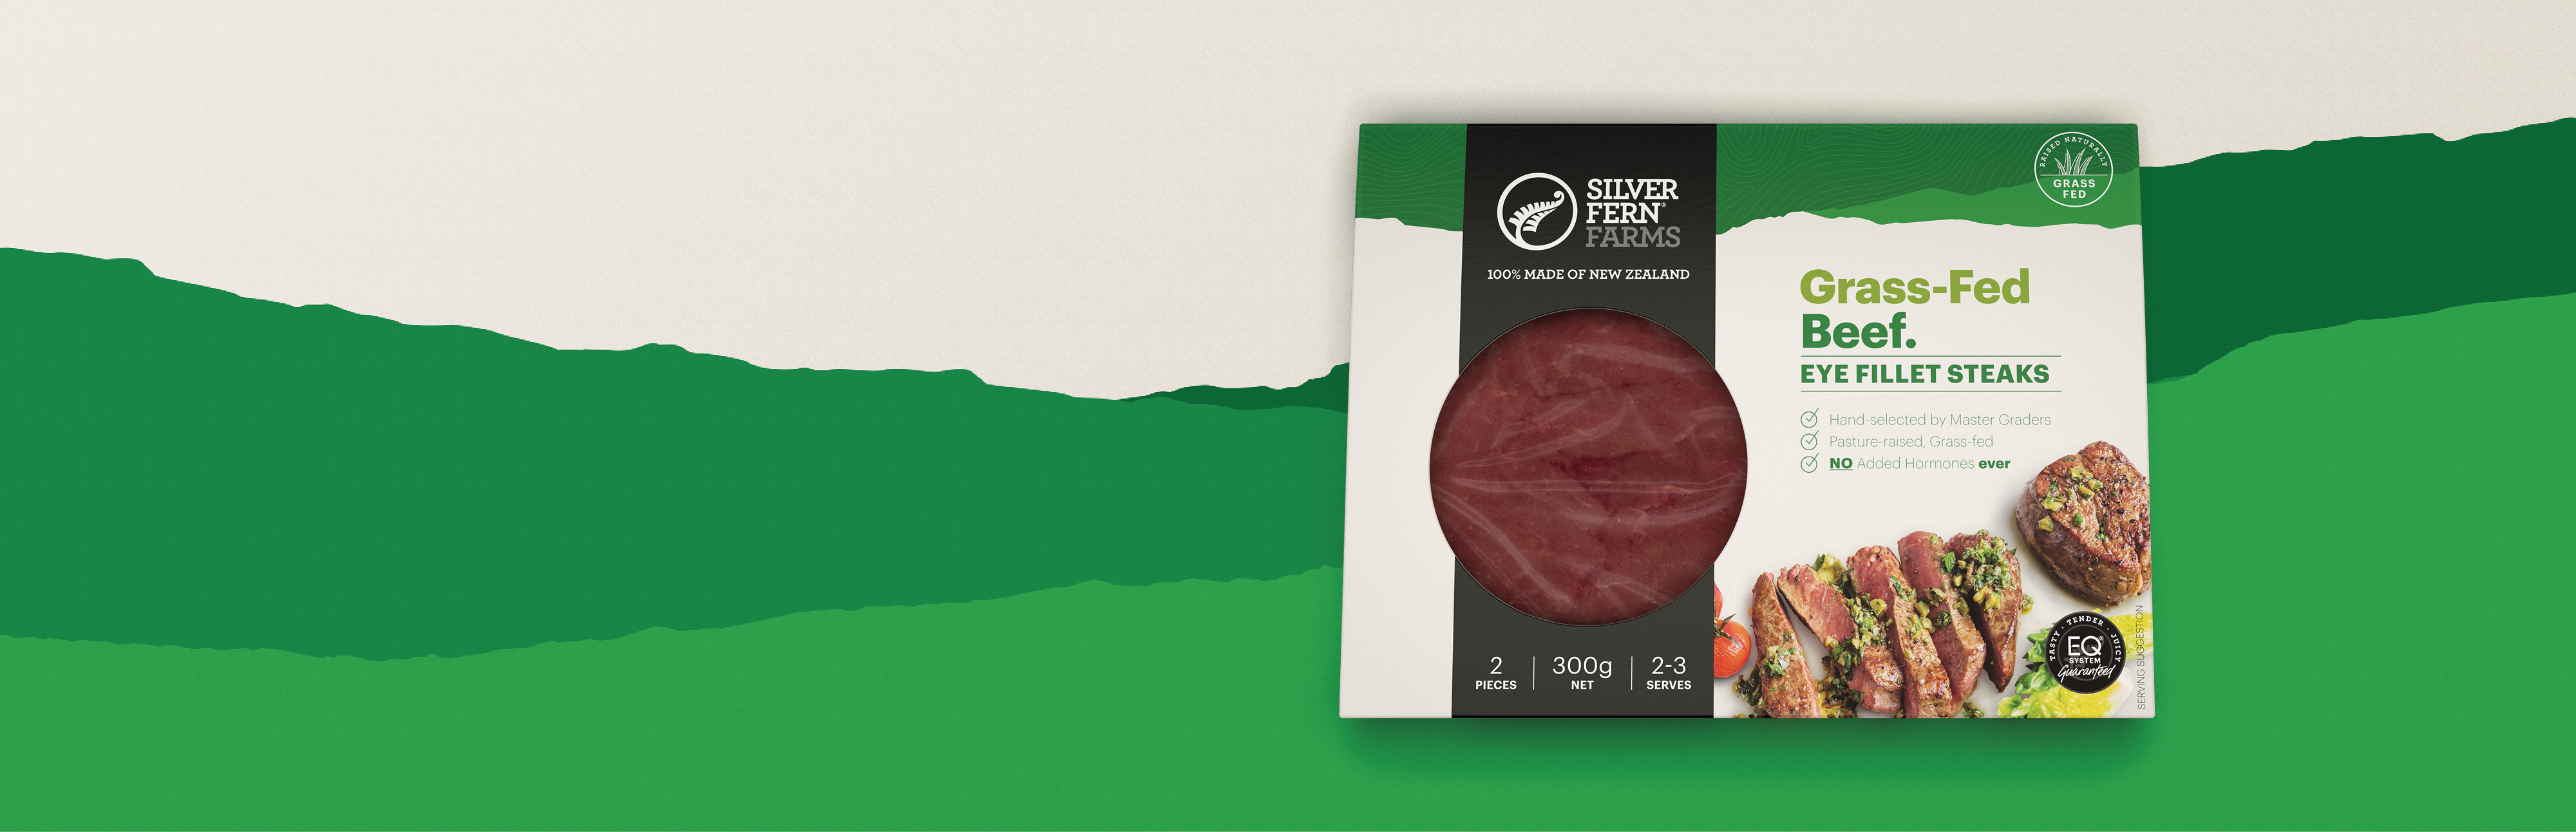 grass-fed beef eye fillet steaks packaging on an illustrated background of green hills